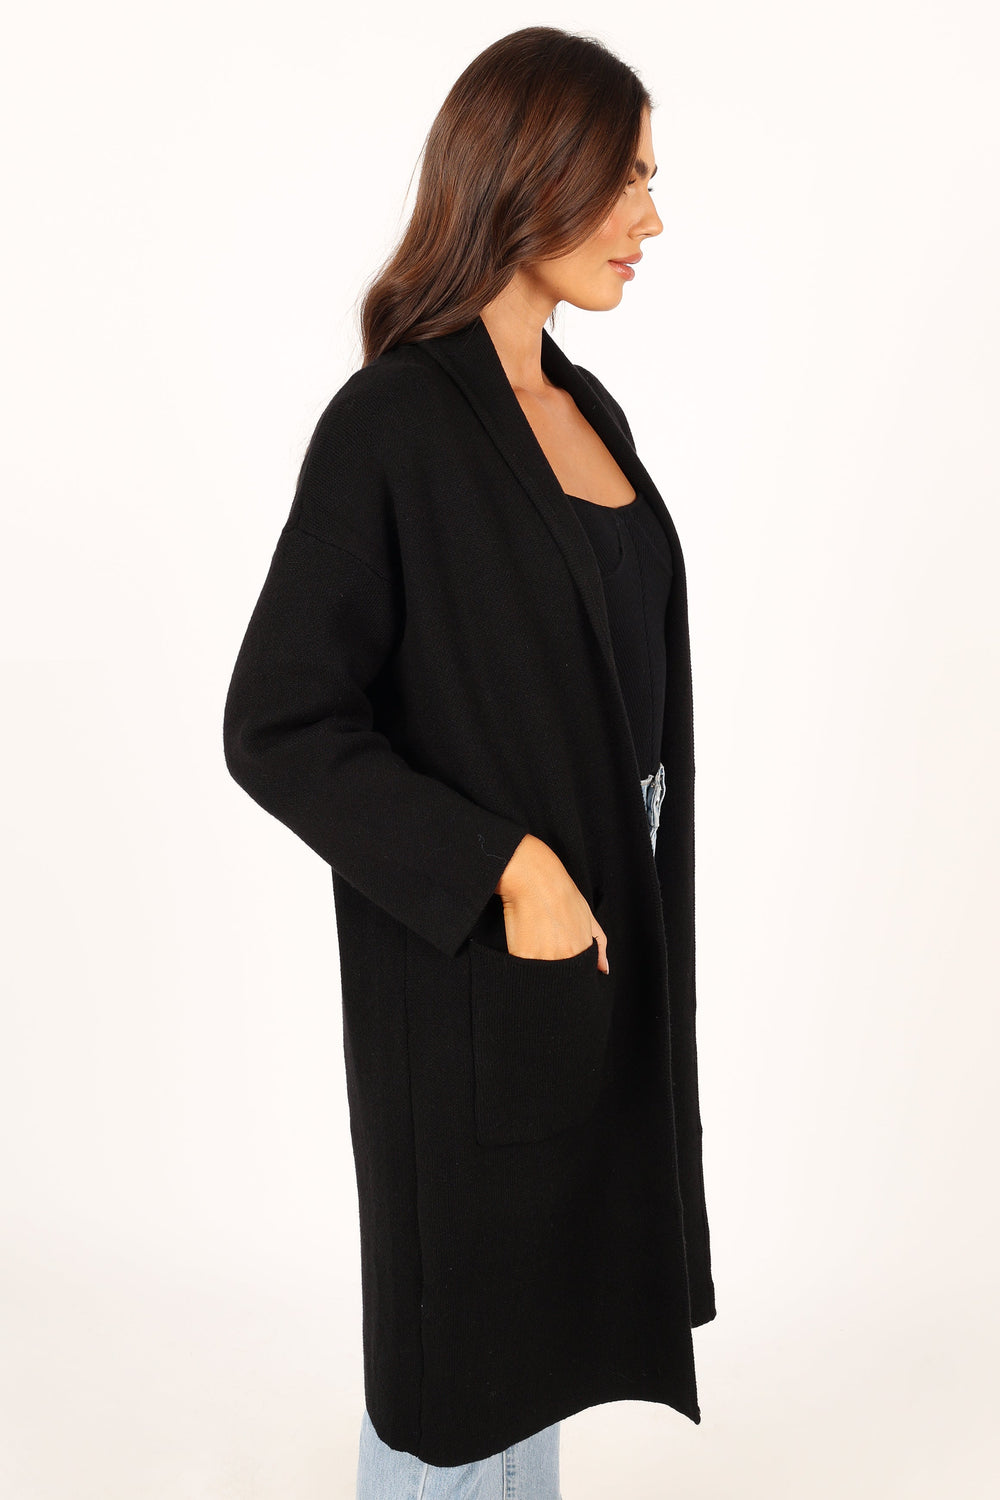 Pre-Fall 2021 Collection Long cardigan in black wool, wh…